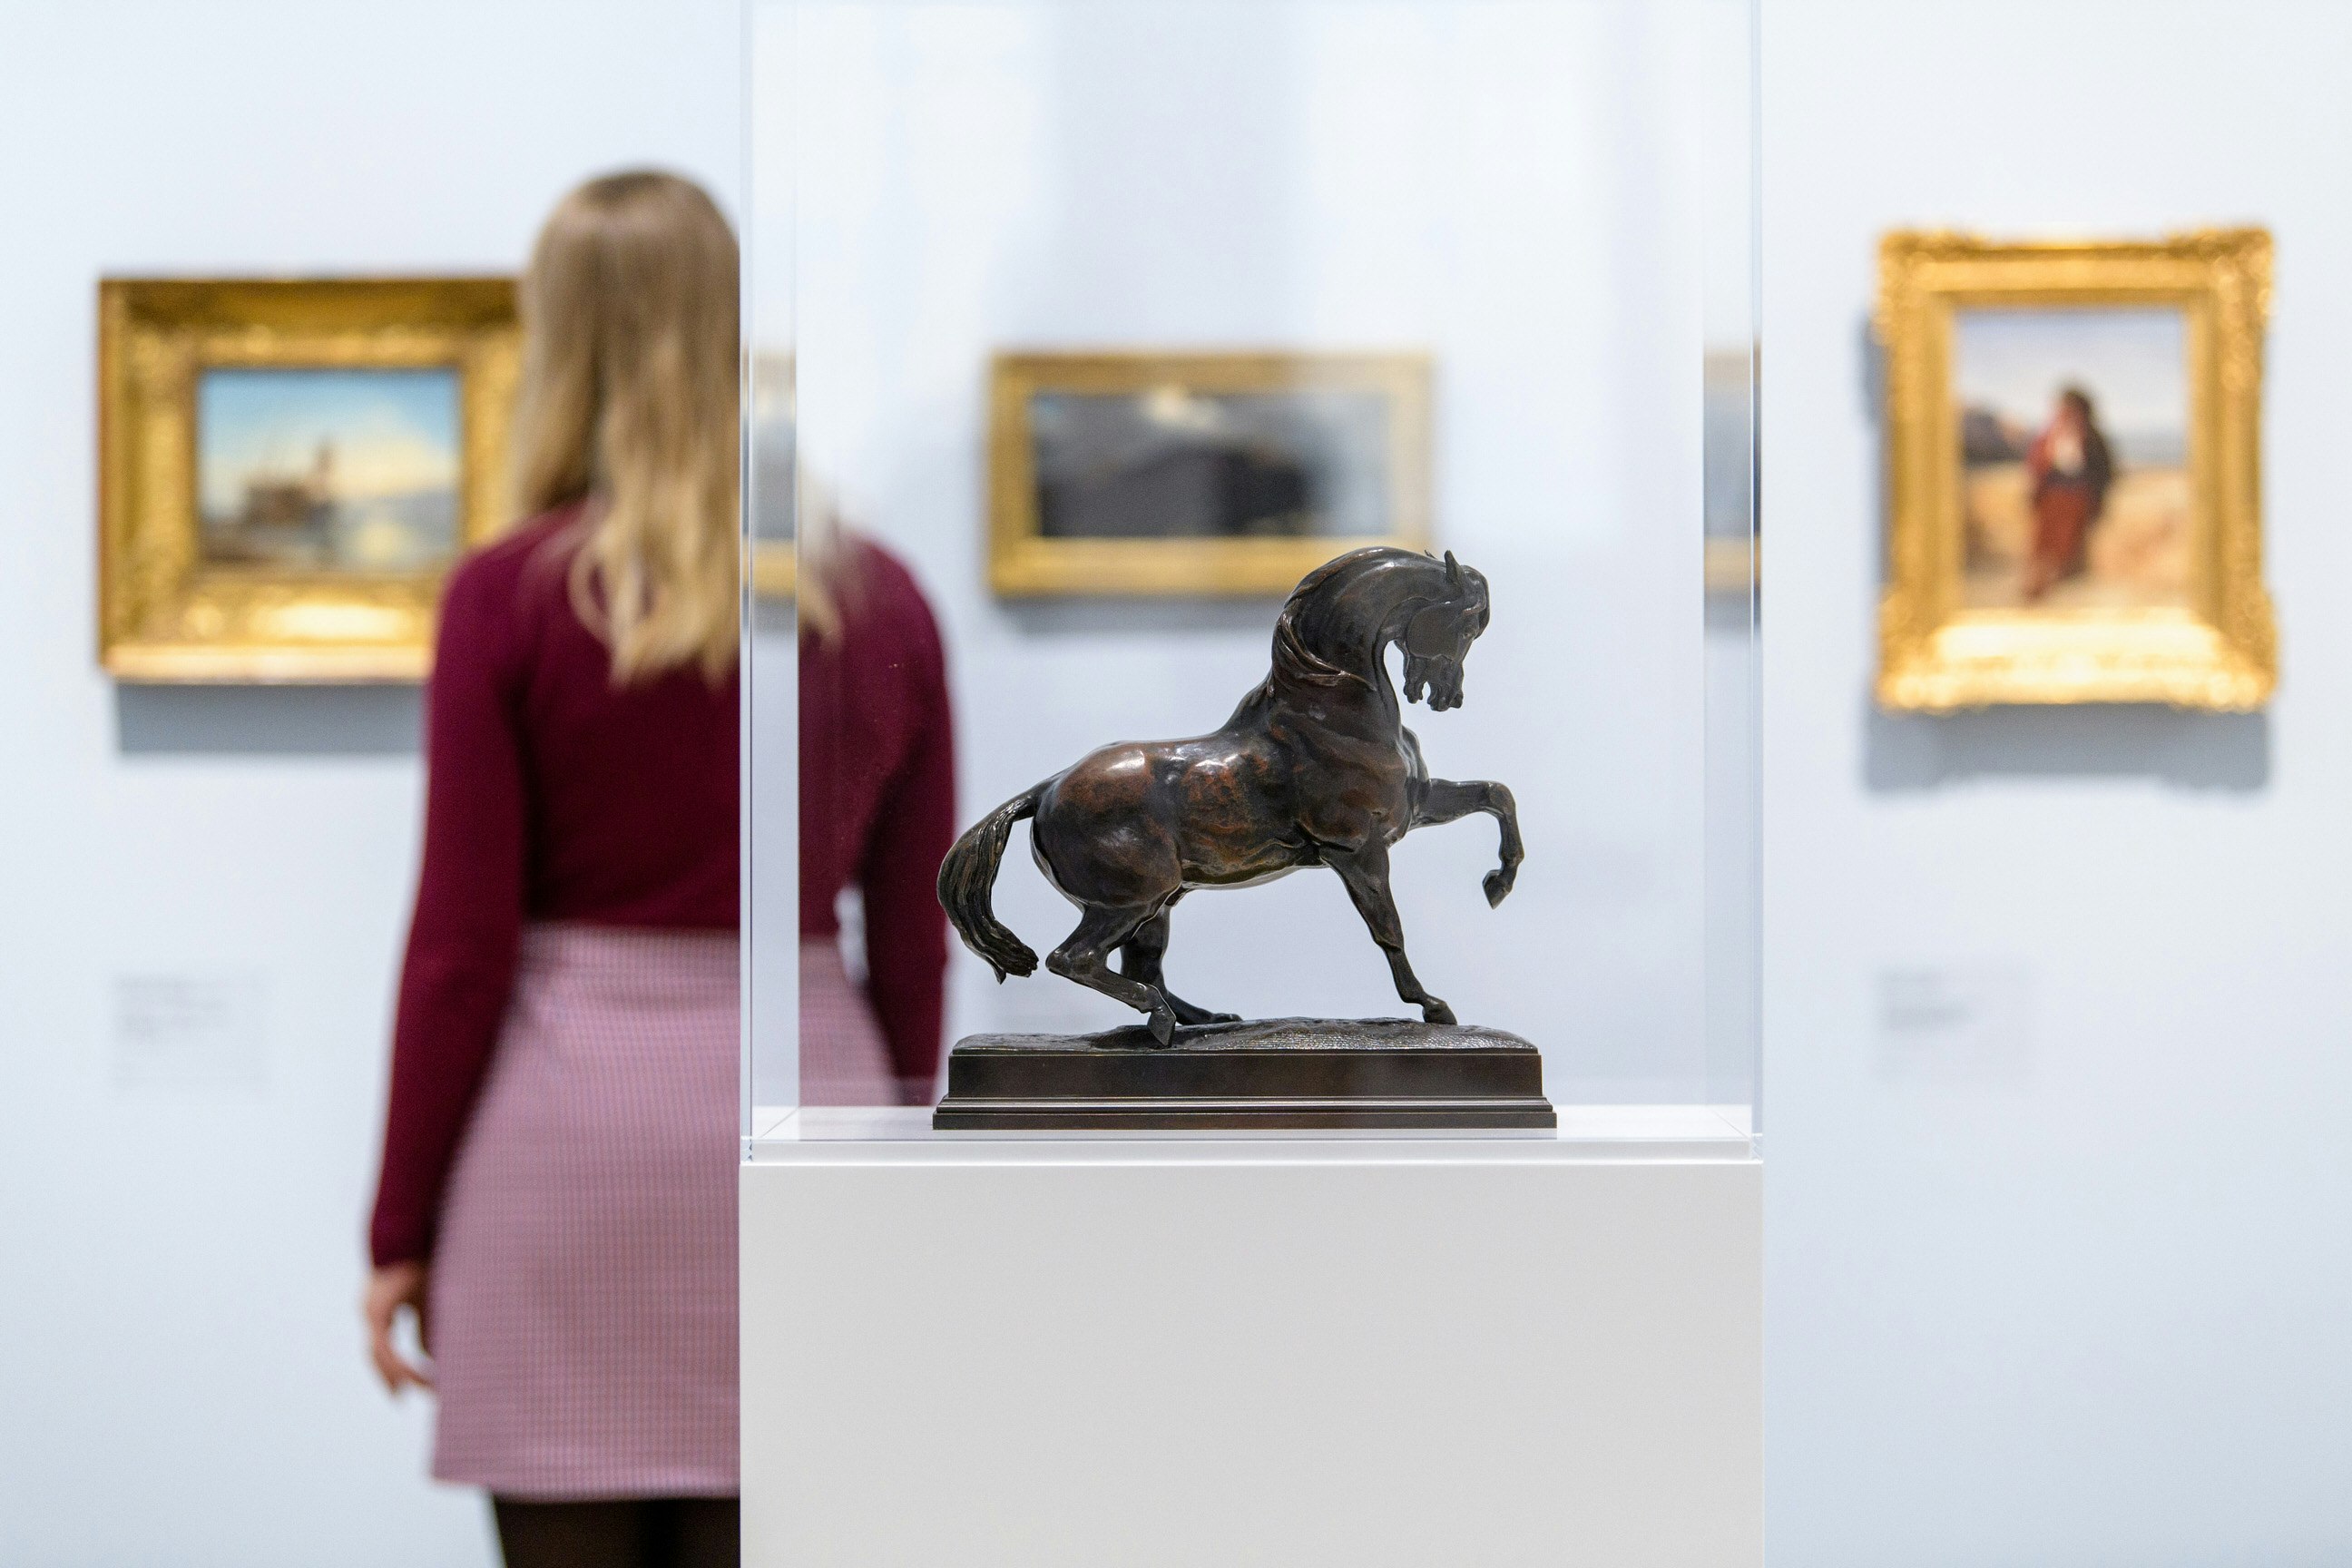 Inside a gallery, a woman is looking at one of three paintings in gold frames, hanging on a white wall. She is in soft focus, while a miniature bronze sculpture of a horse inside a glass case is in the foreground.